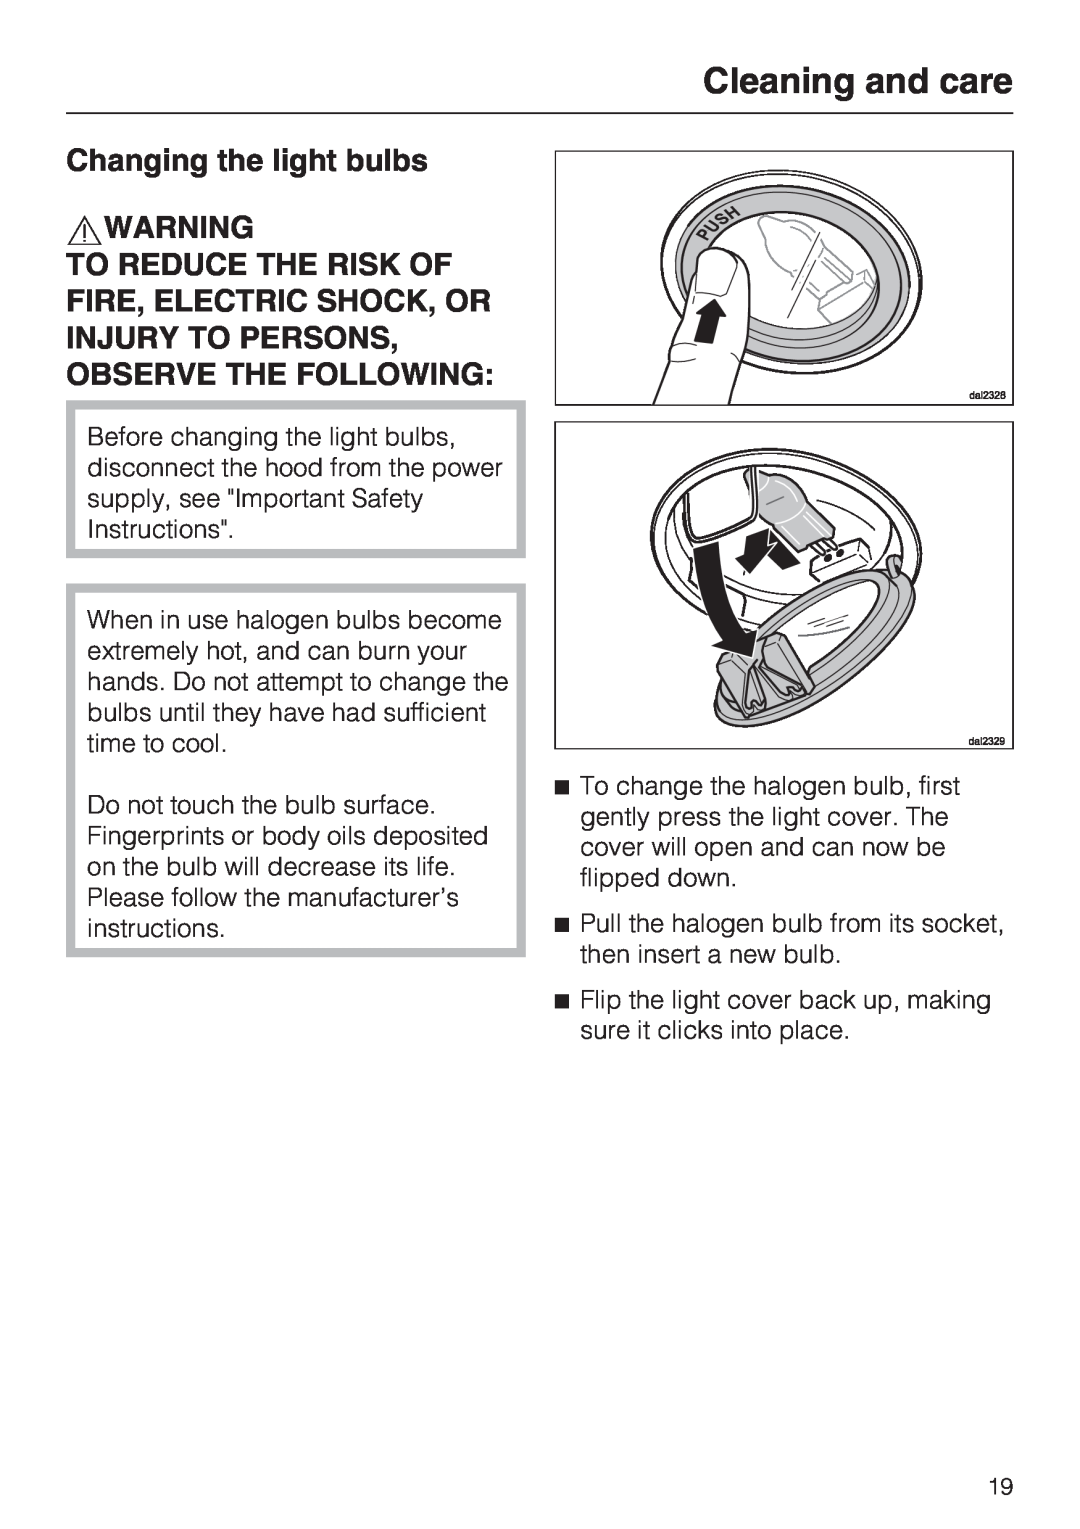 Miele DA 270-4, ventilation system installation instructions Changing the light bulbs, Cleaning and care 